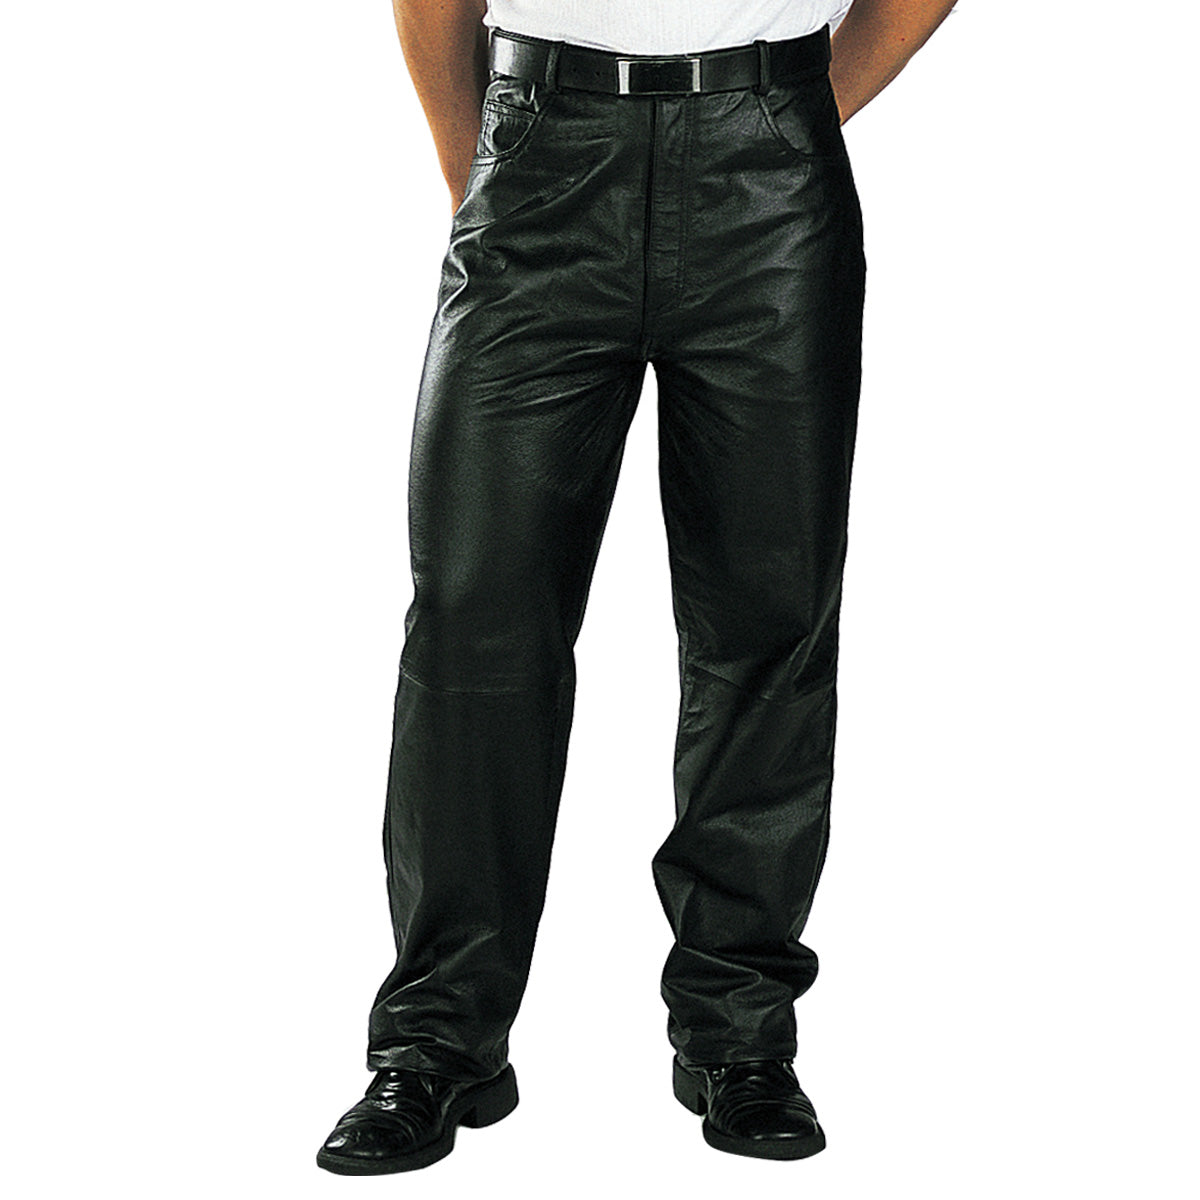 Xelement 860 Men's 'Classic' Black Loose Fit Motorcycle Casual